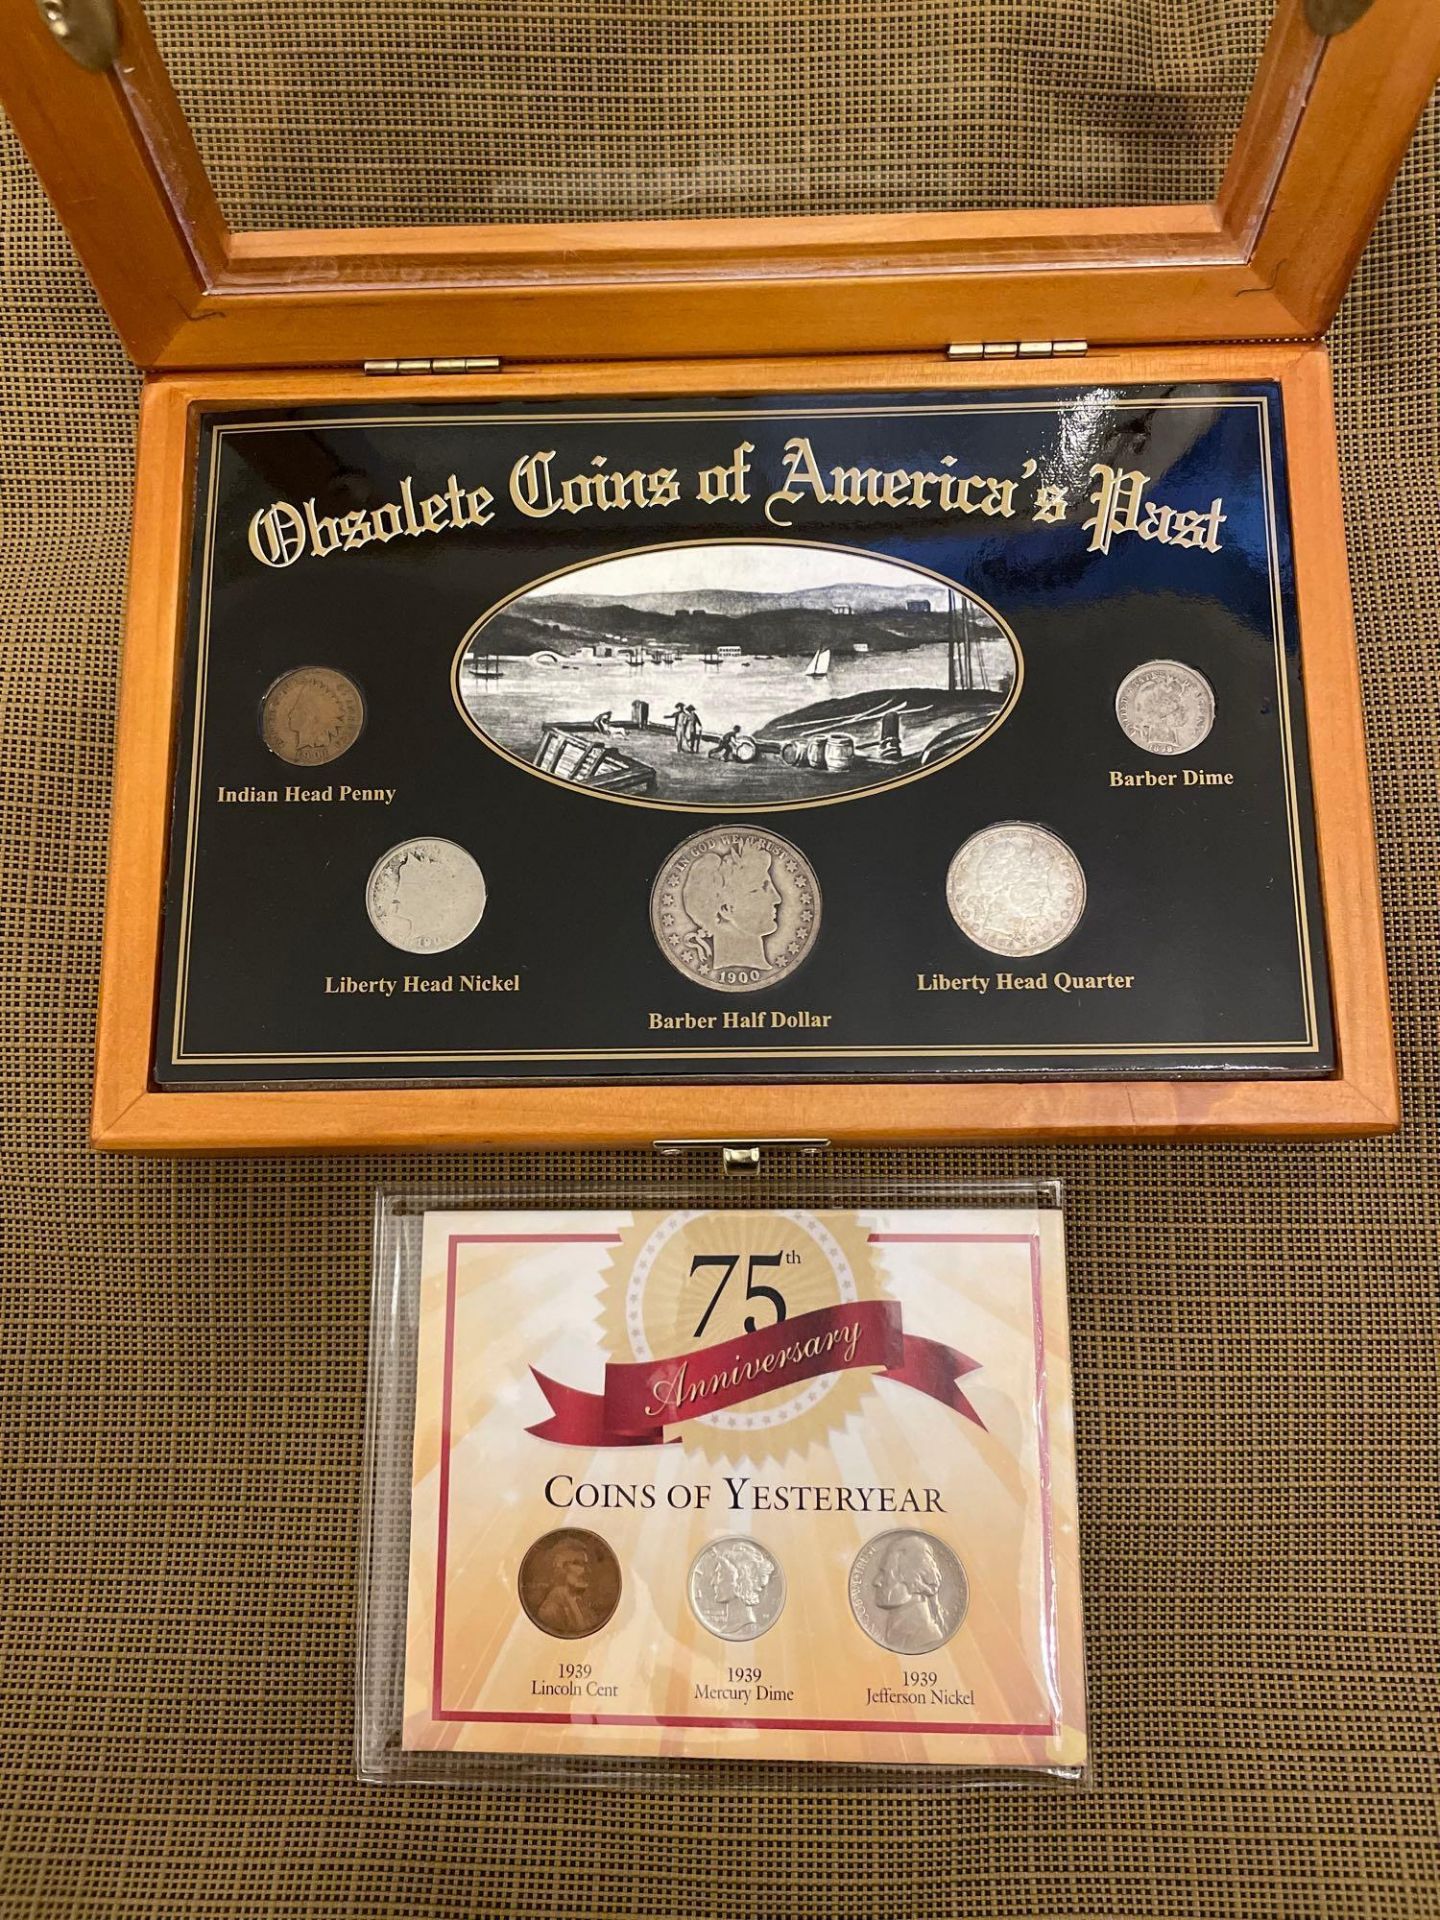 Obsolete Coins of America's Past & 75th Anniversary Coins of Yesteryear